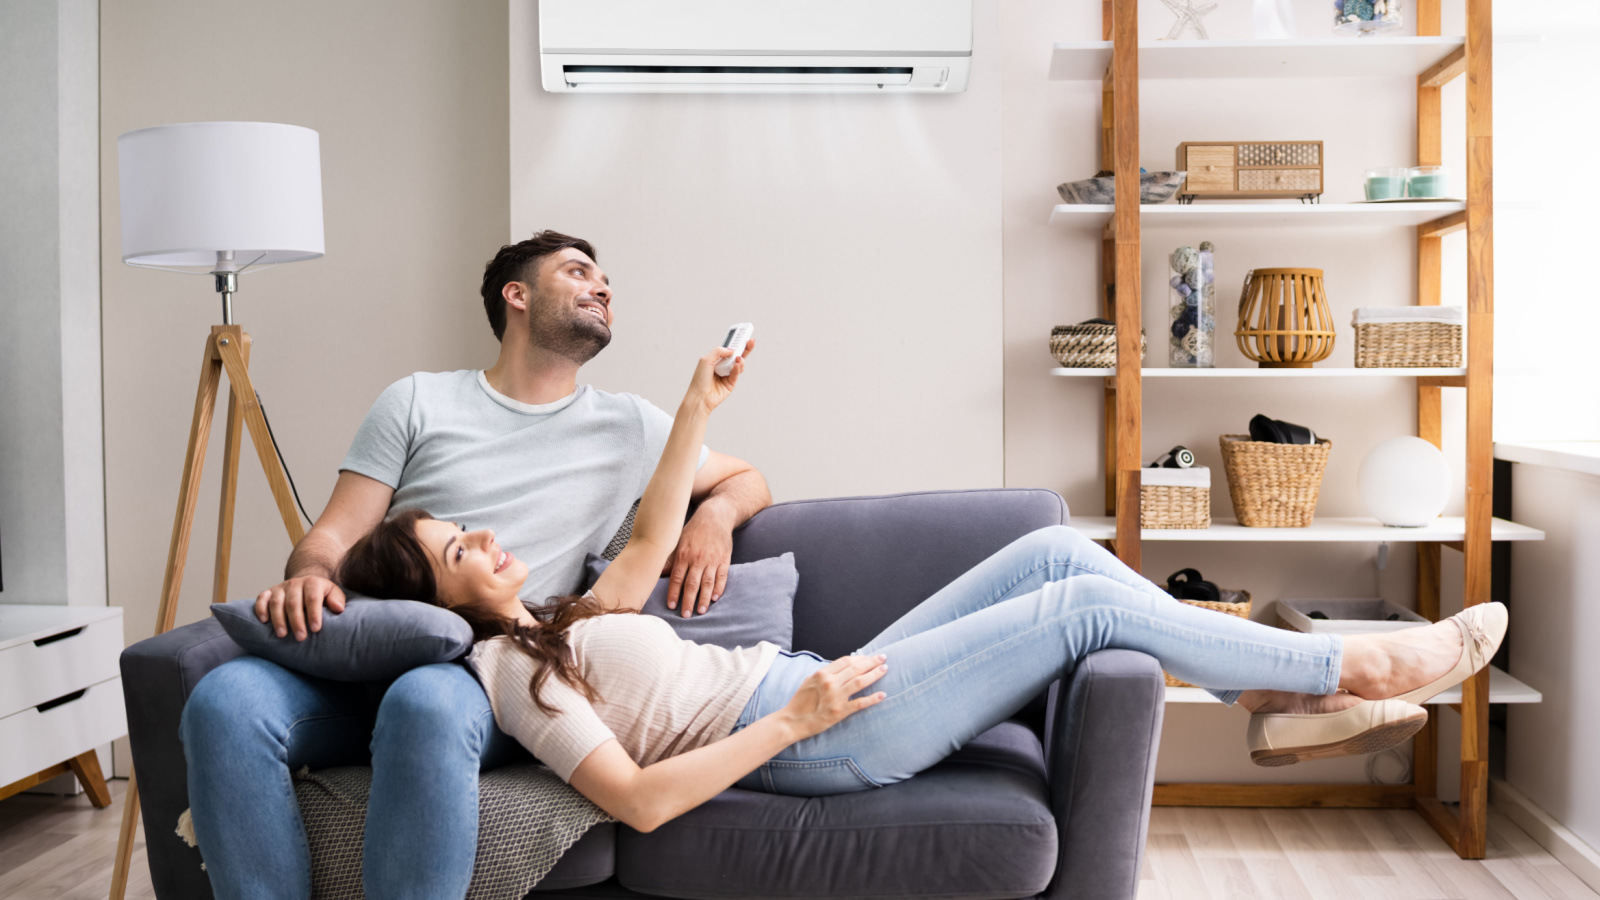 Top AC Accessories to Enhance Your Home Cooling | AC Services St. Louis | HVAC Services Near Me